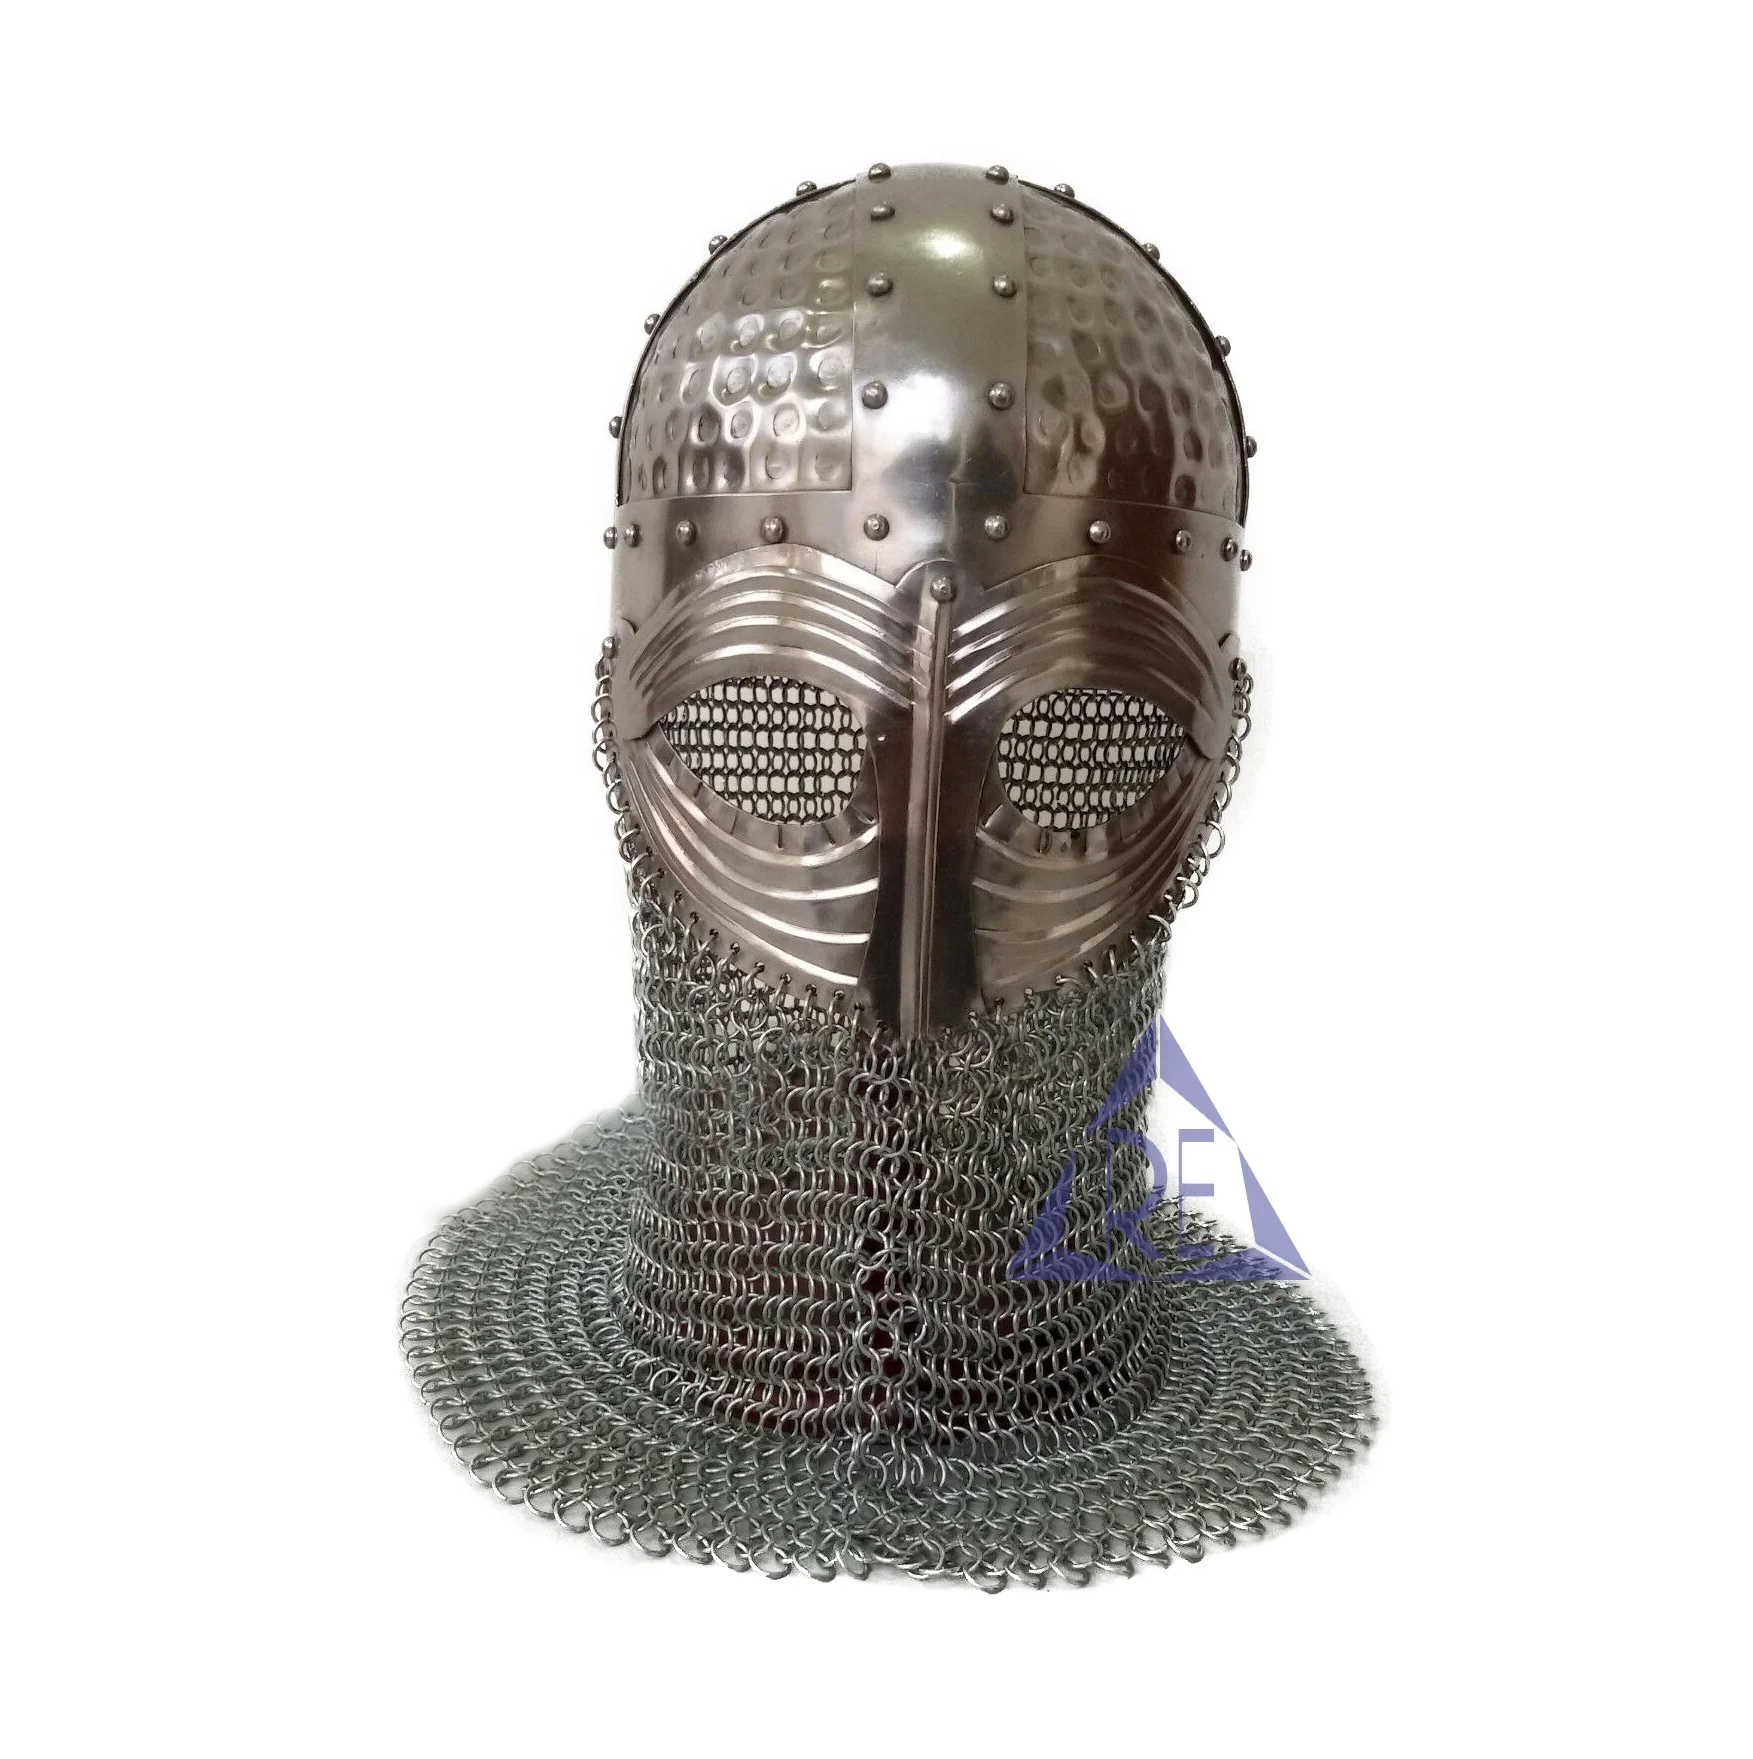 Viking Mask Helmet with Chain Mail Medieval Armor Role Play Costume Helmet gift 